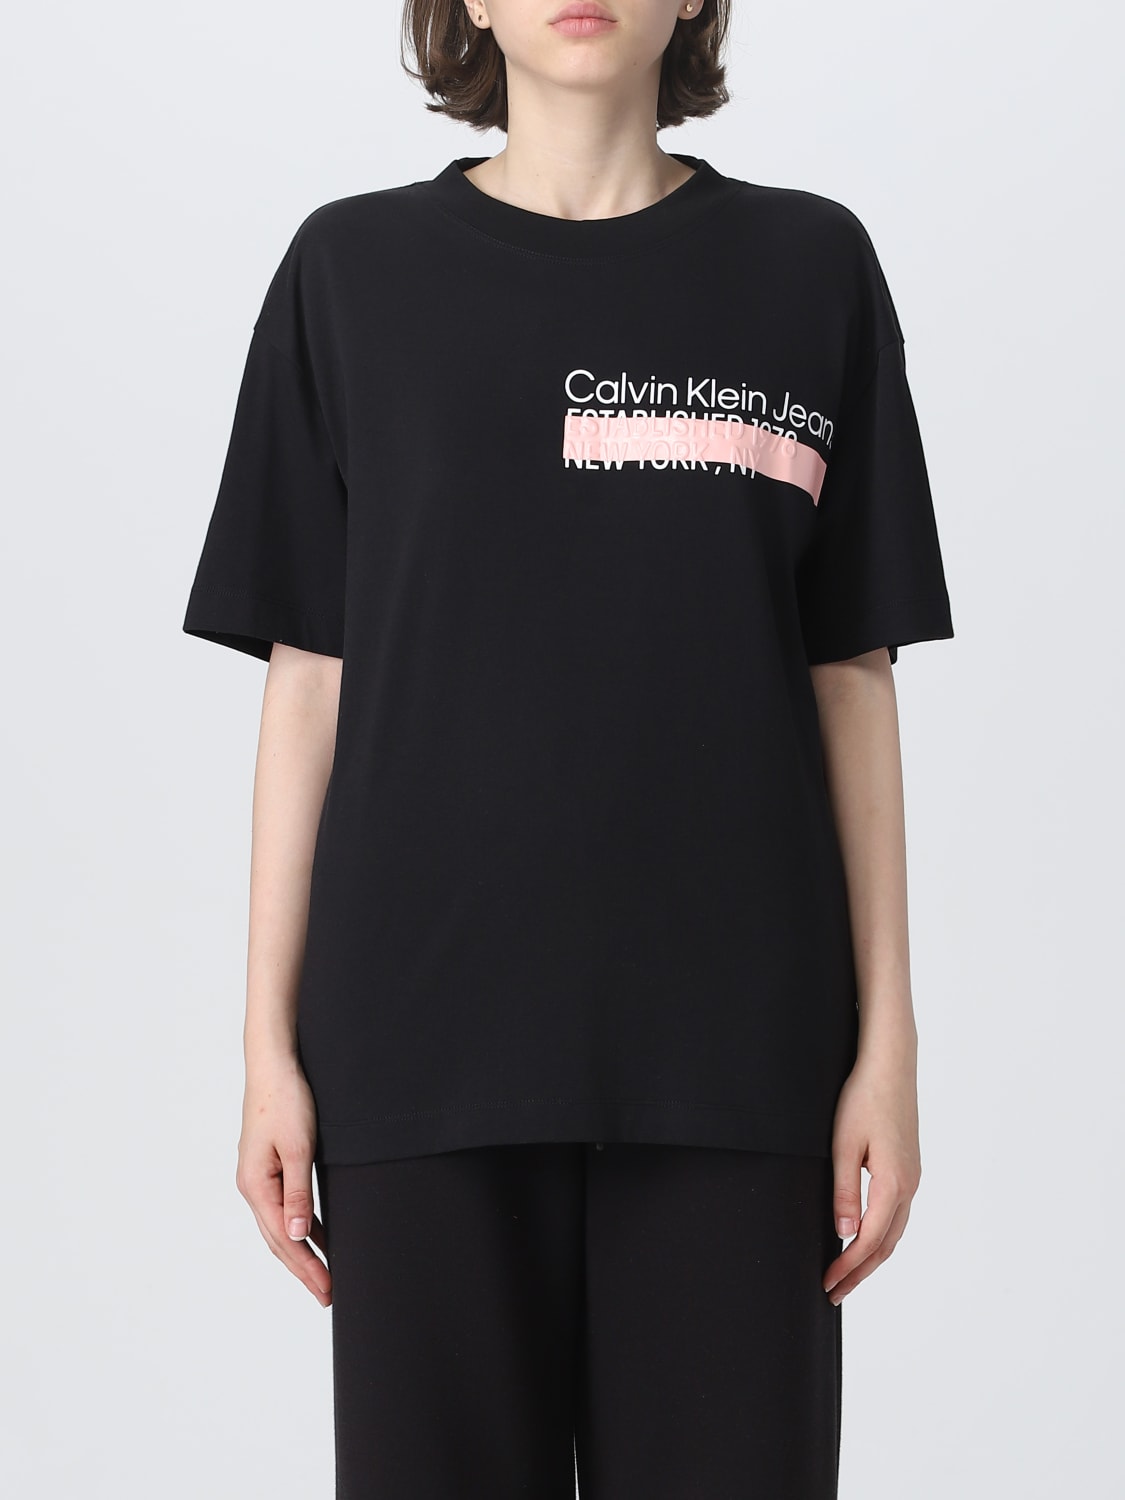 Calvin Klein Jeans T-Shirts − Sale: up to −35%